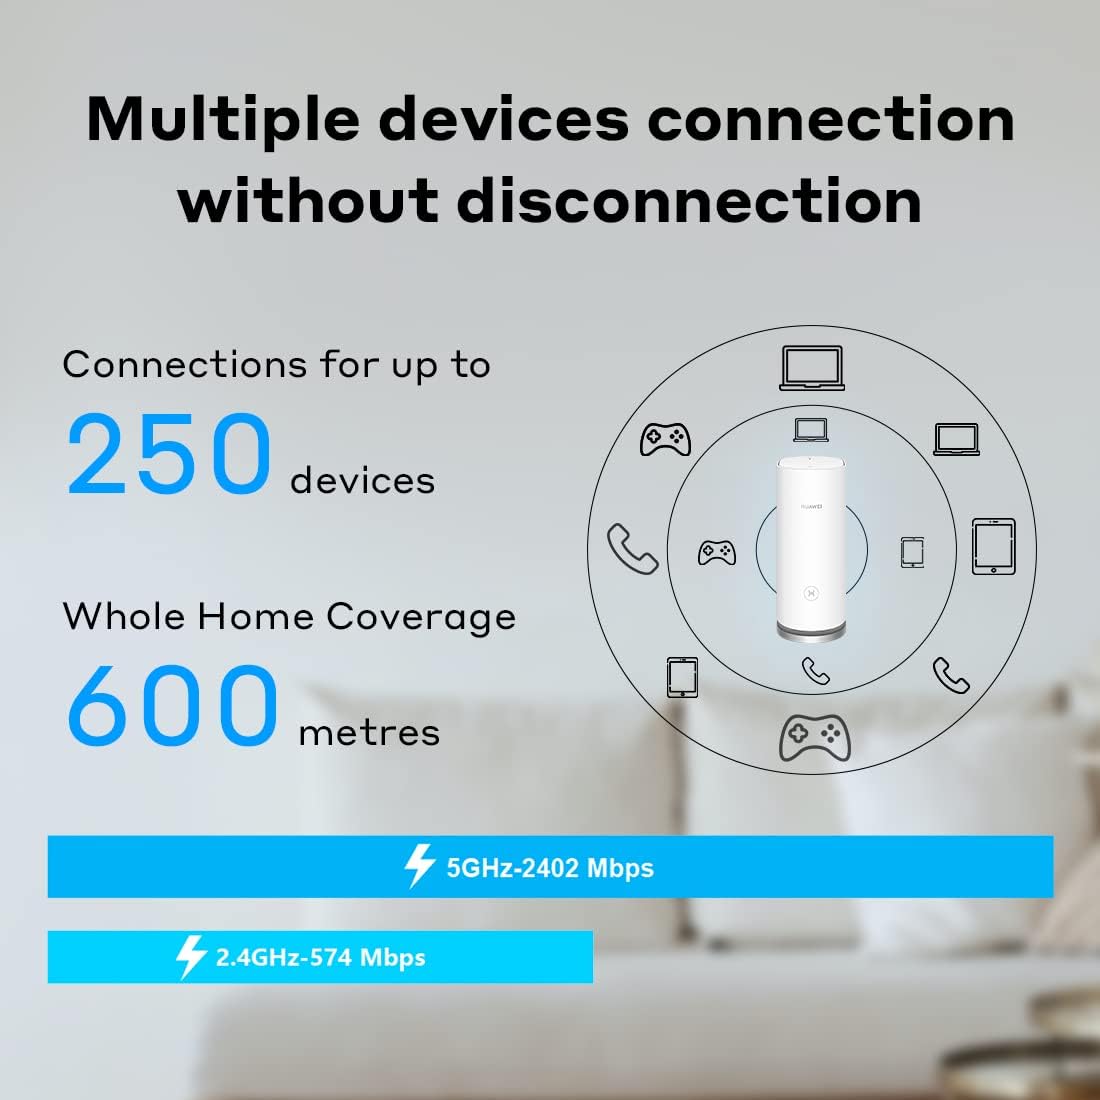 HUAWEI WiFi Mesh 3 AX3000 Whole Home Mesh WiFi System Seamless & Speedy Up to 3000Mbps